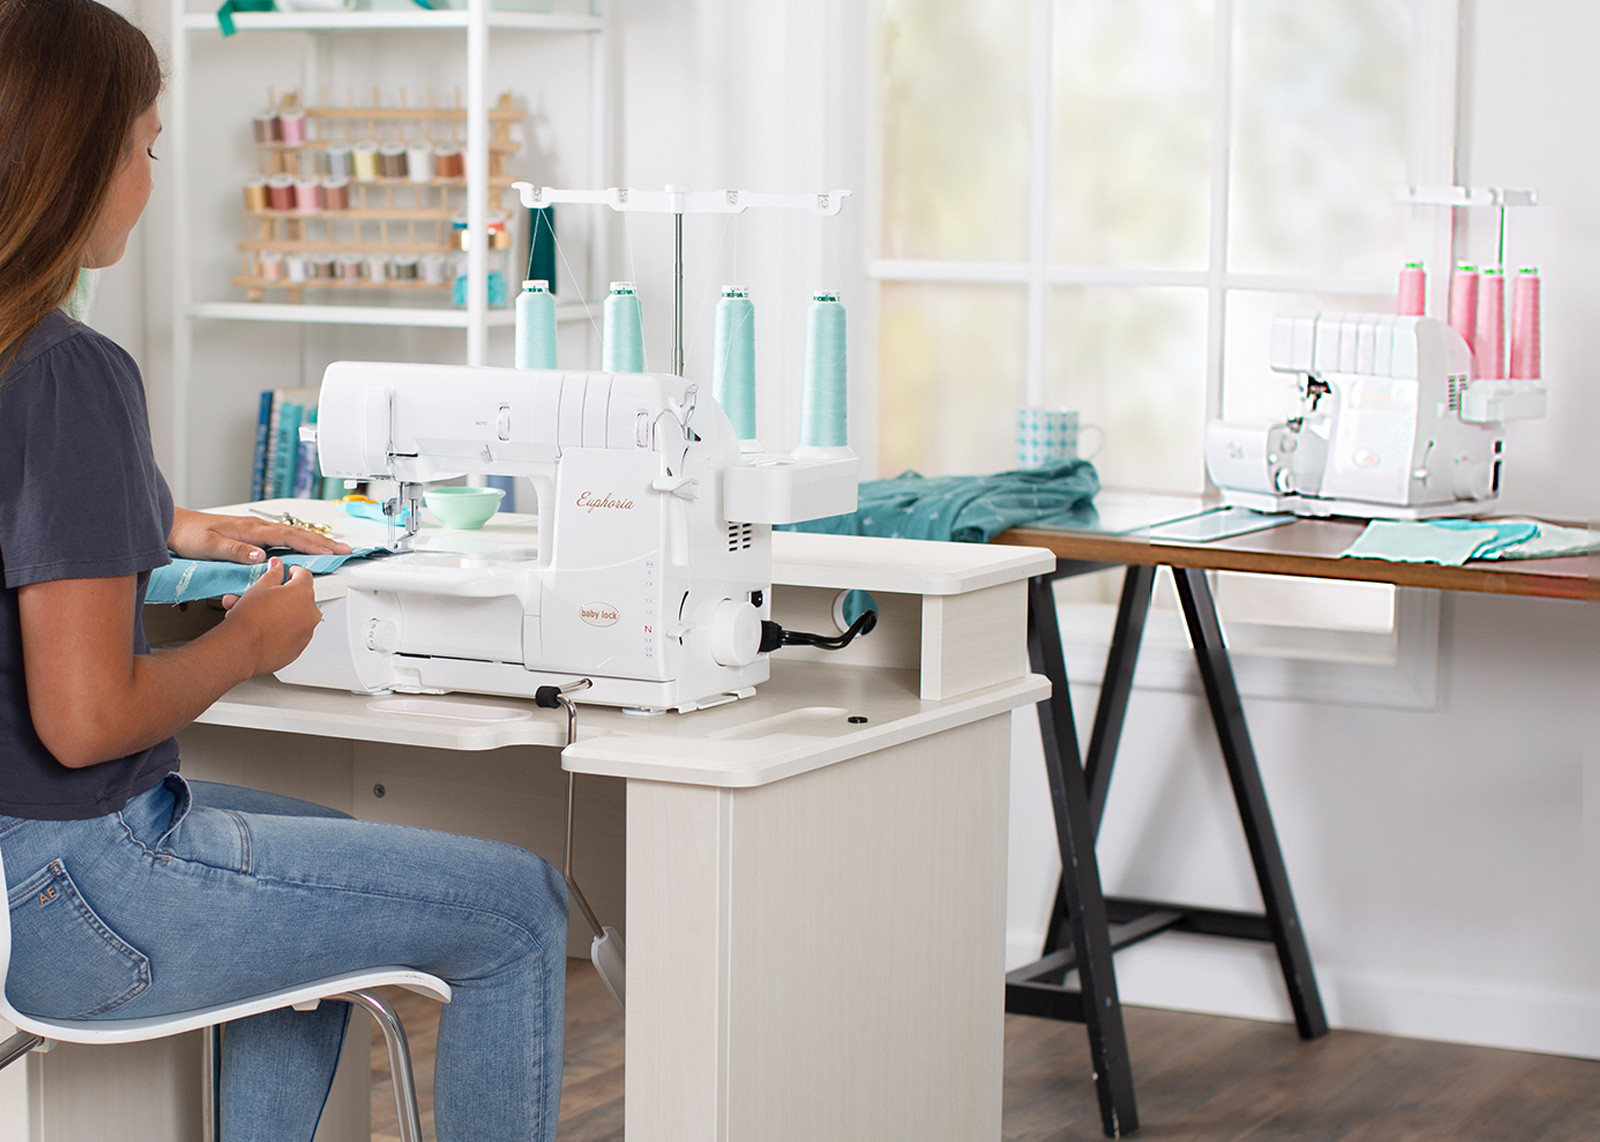 Baby Lock Euphoria Cover Stitch Serger Sewing Machine is easy to use for garment sewists